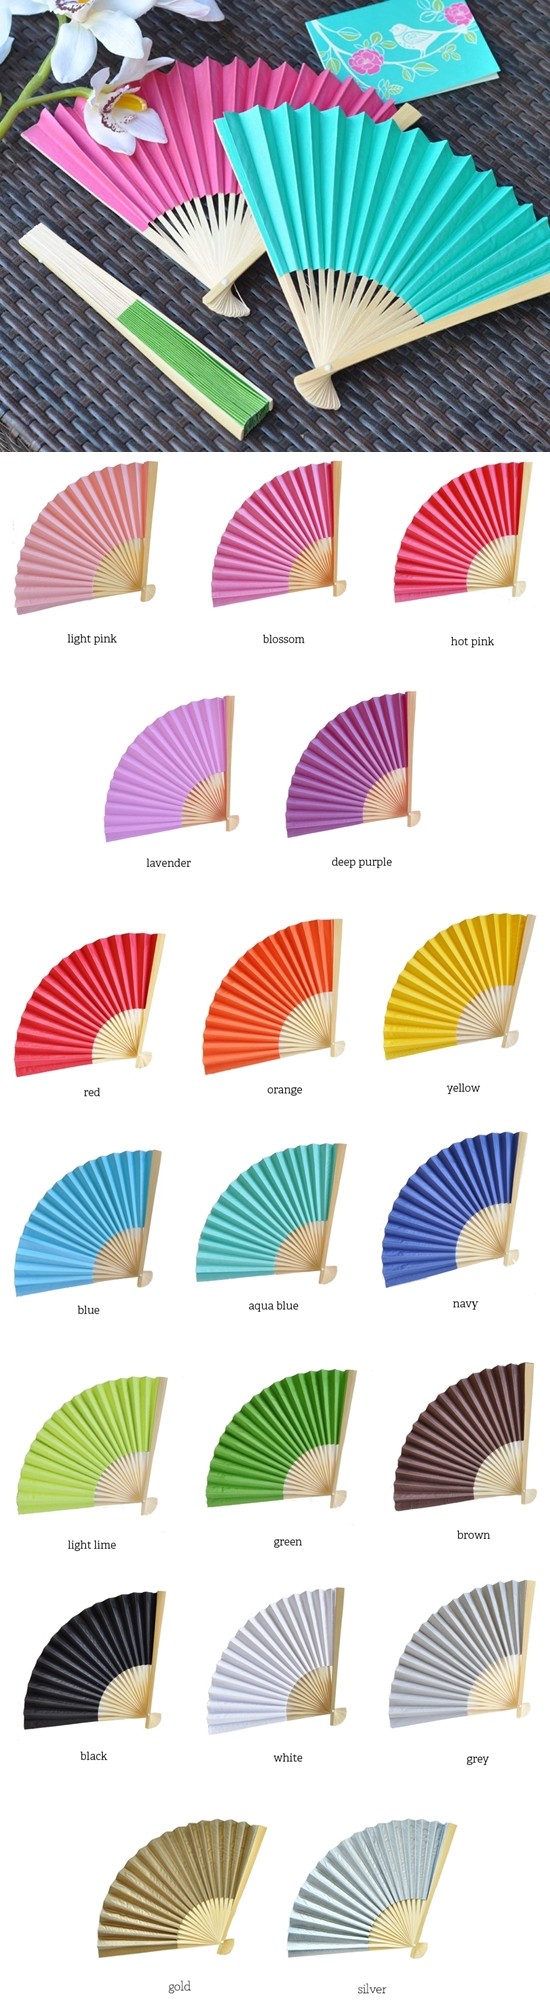 Event Blossom Vibrantly-Colored Paper Fans (19 Colors)